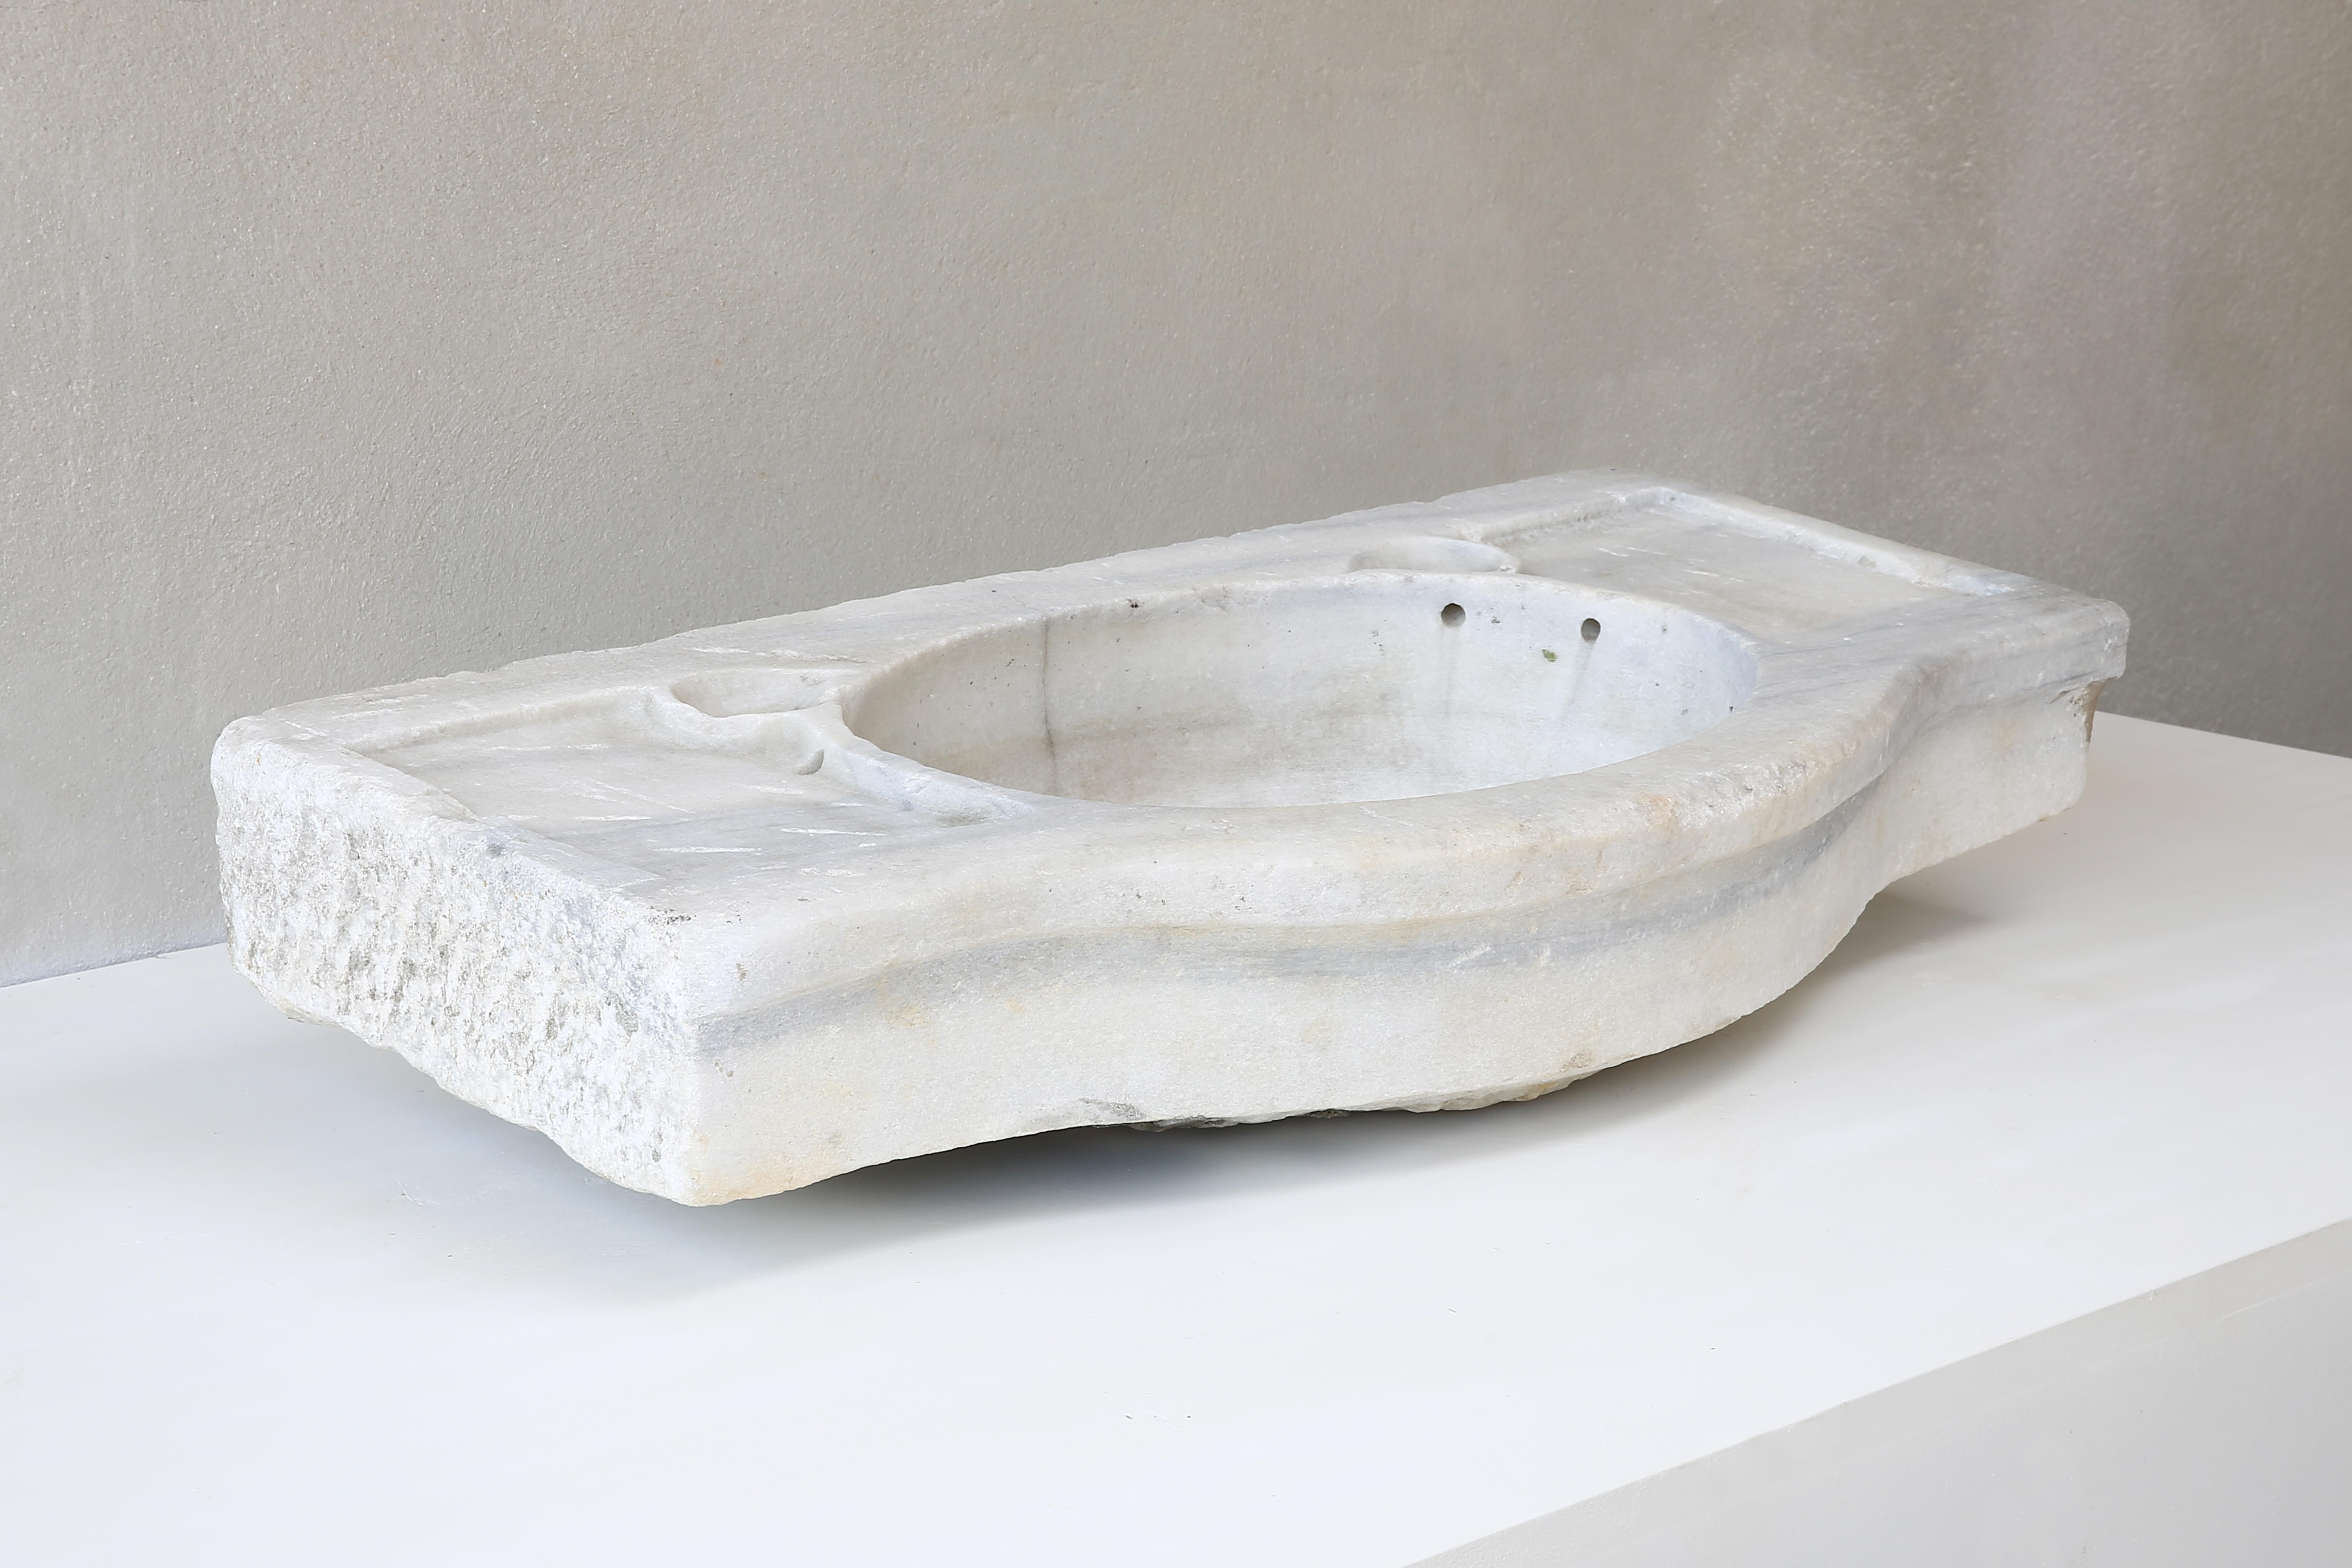 A beautiful sink of Carrara marble from the 19th century. A sink that can be used in the bathroom, toilet or veranda!